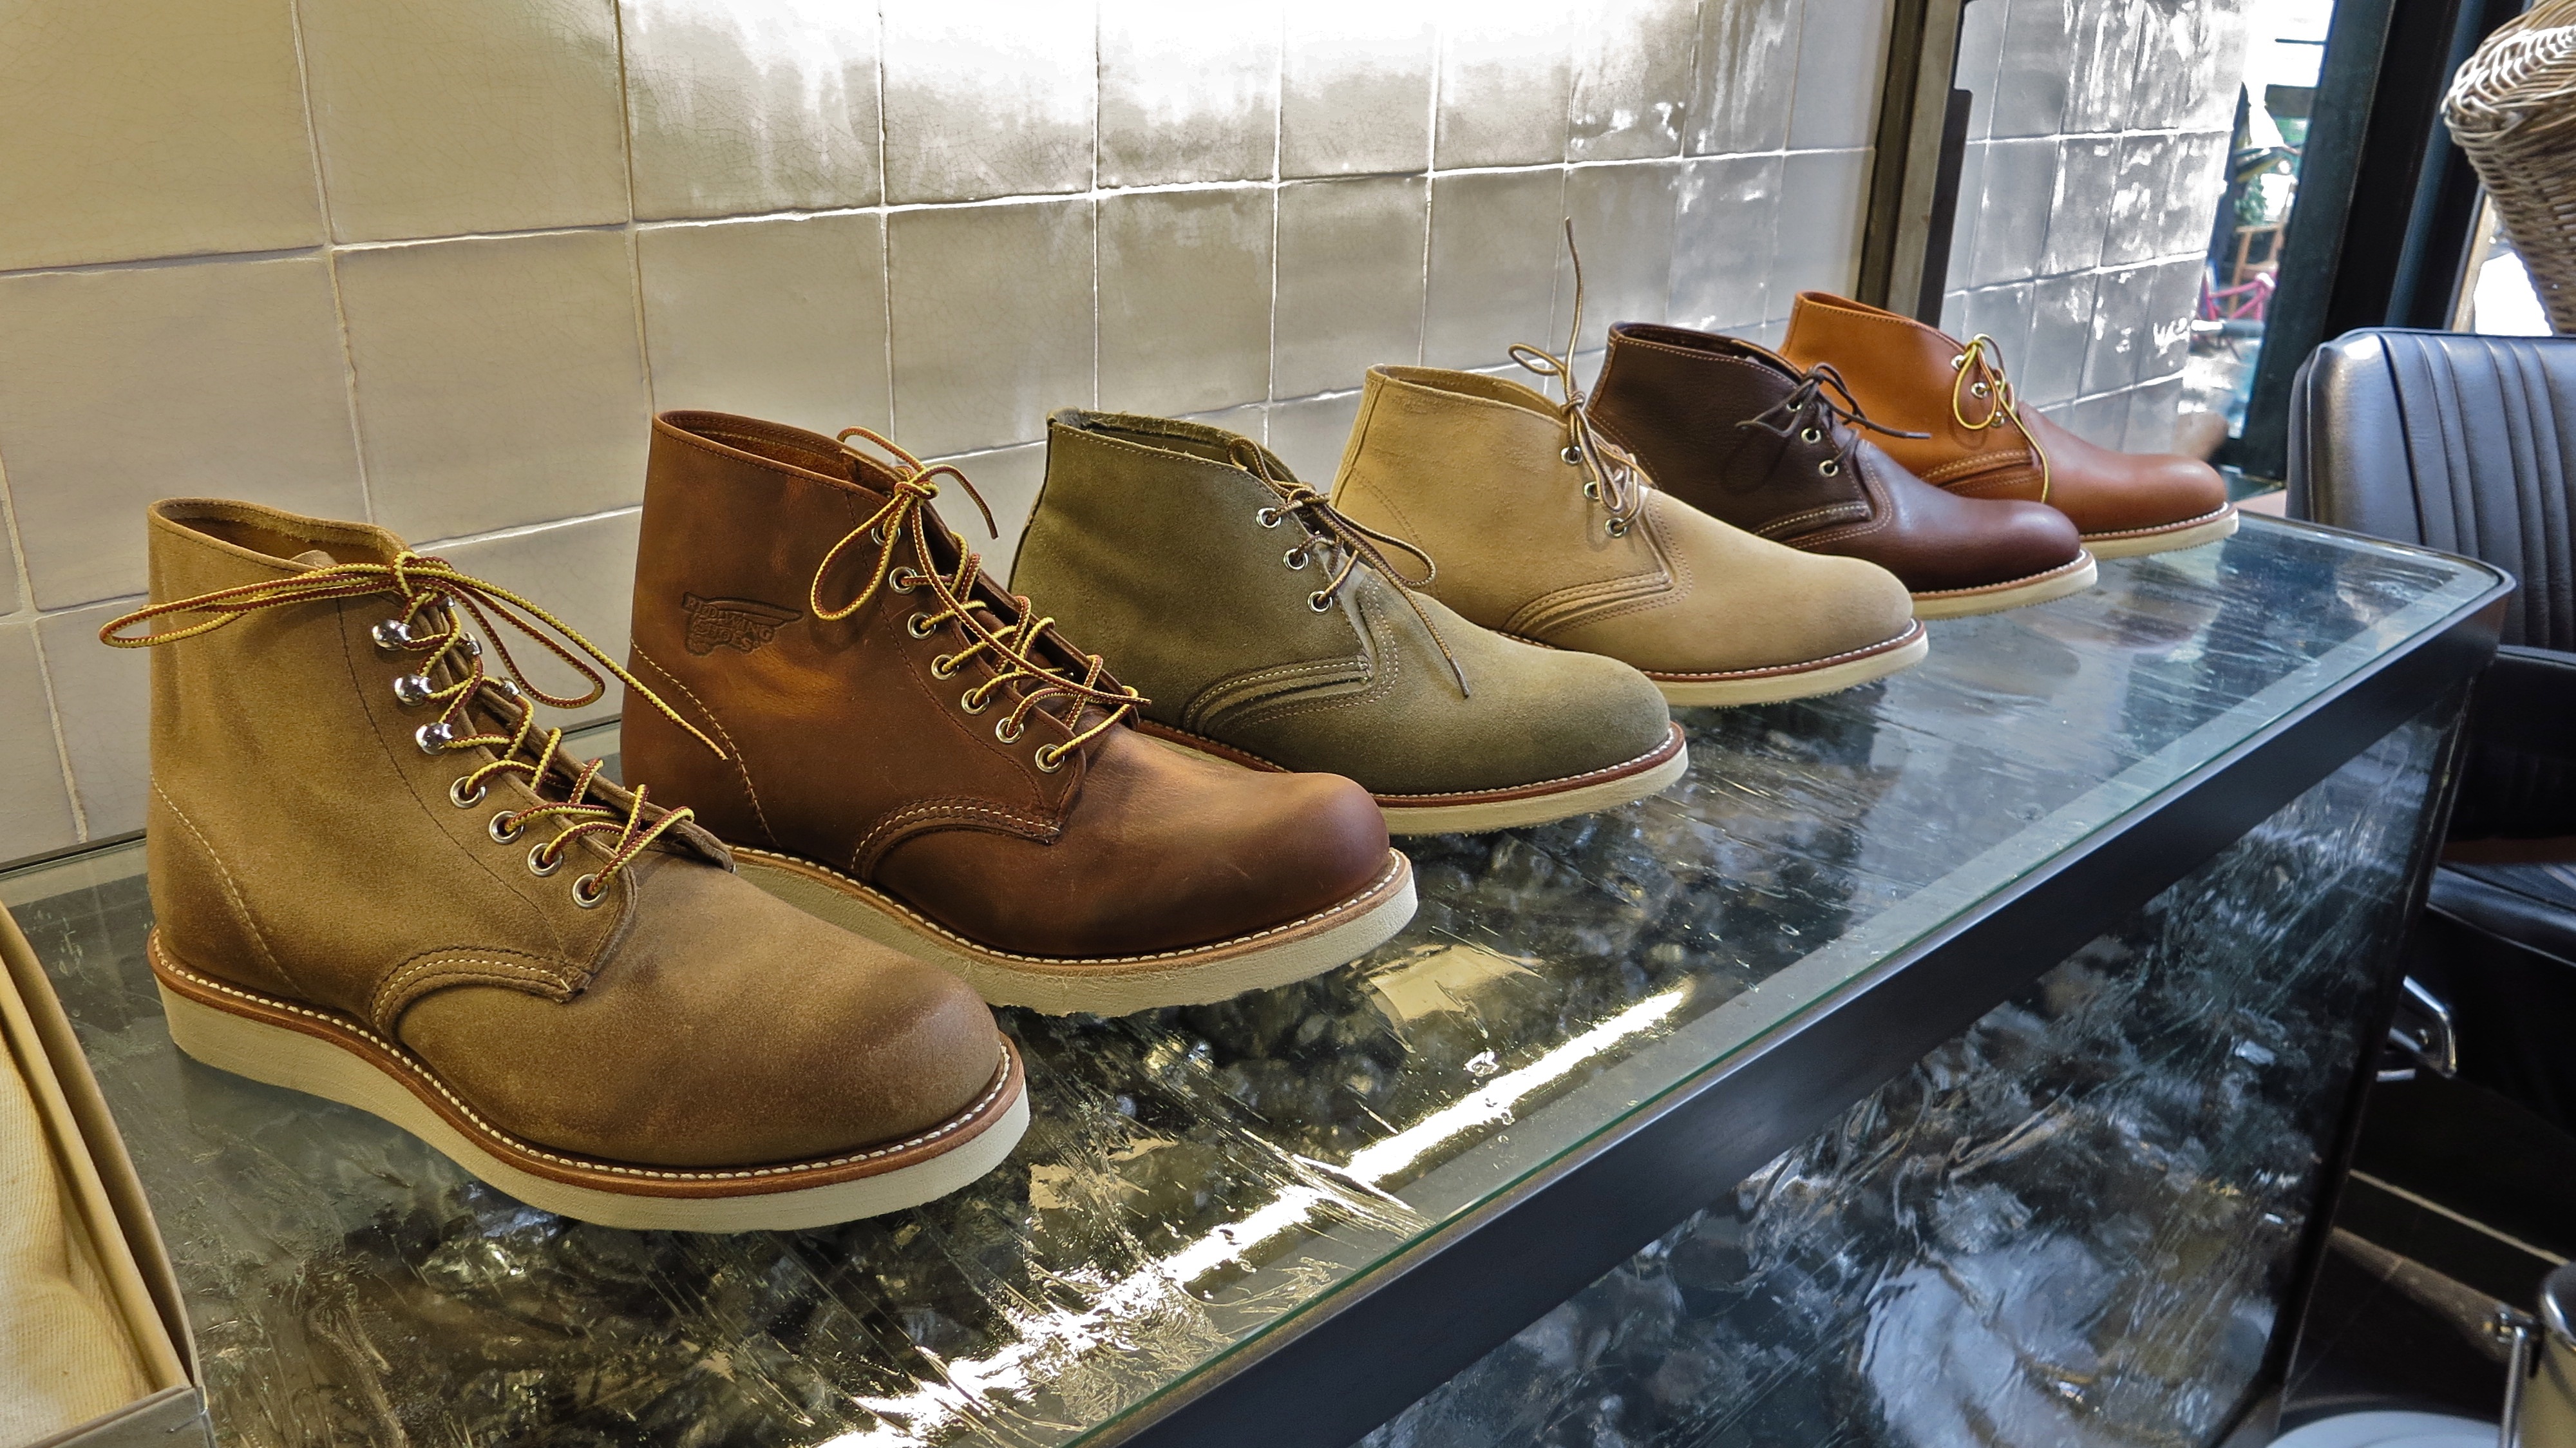 Wing Shoes Amsterdam - Dye Crafted Goods